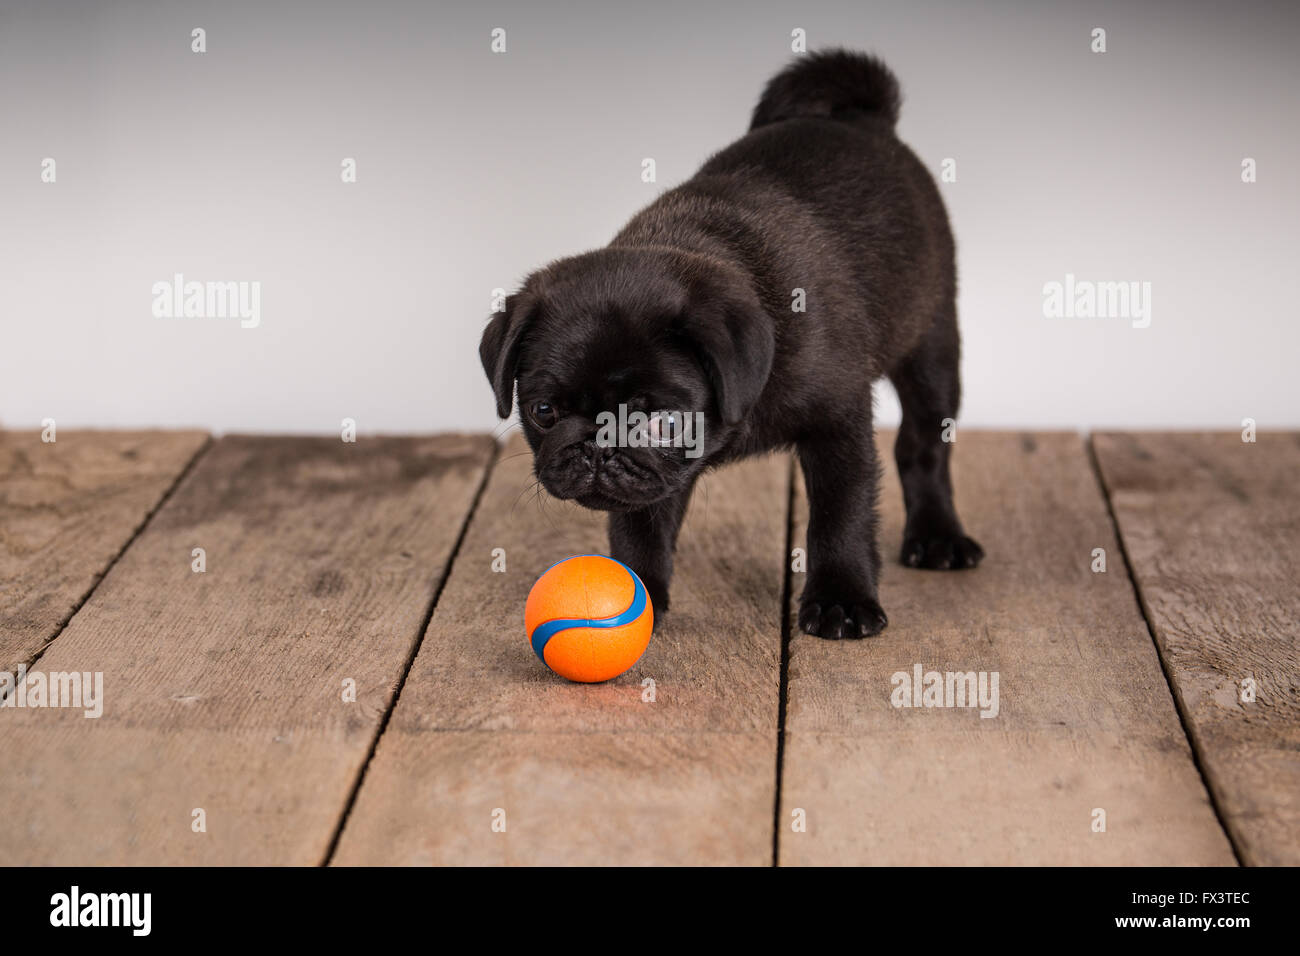 Fitzgerald, a 10 week old black Pug puppy looking at his ball in Issaquah, Washington, USA Stock Photo